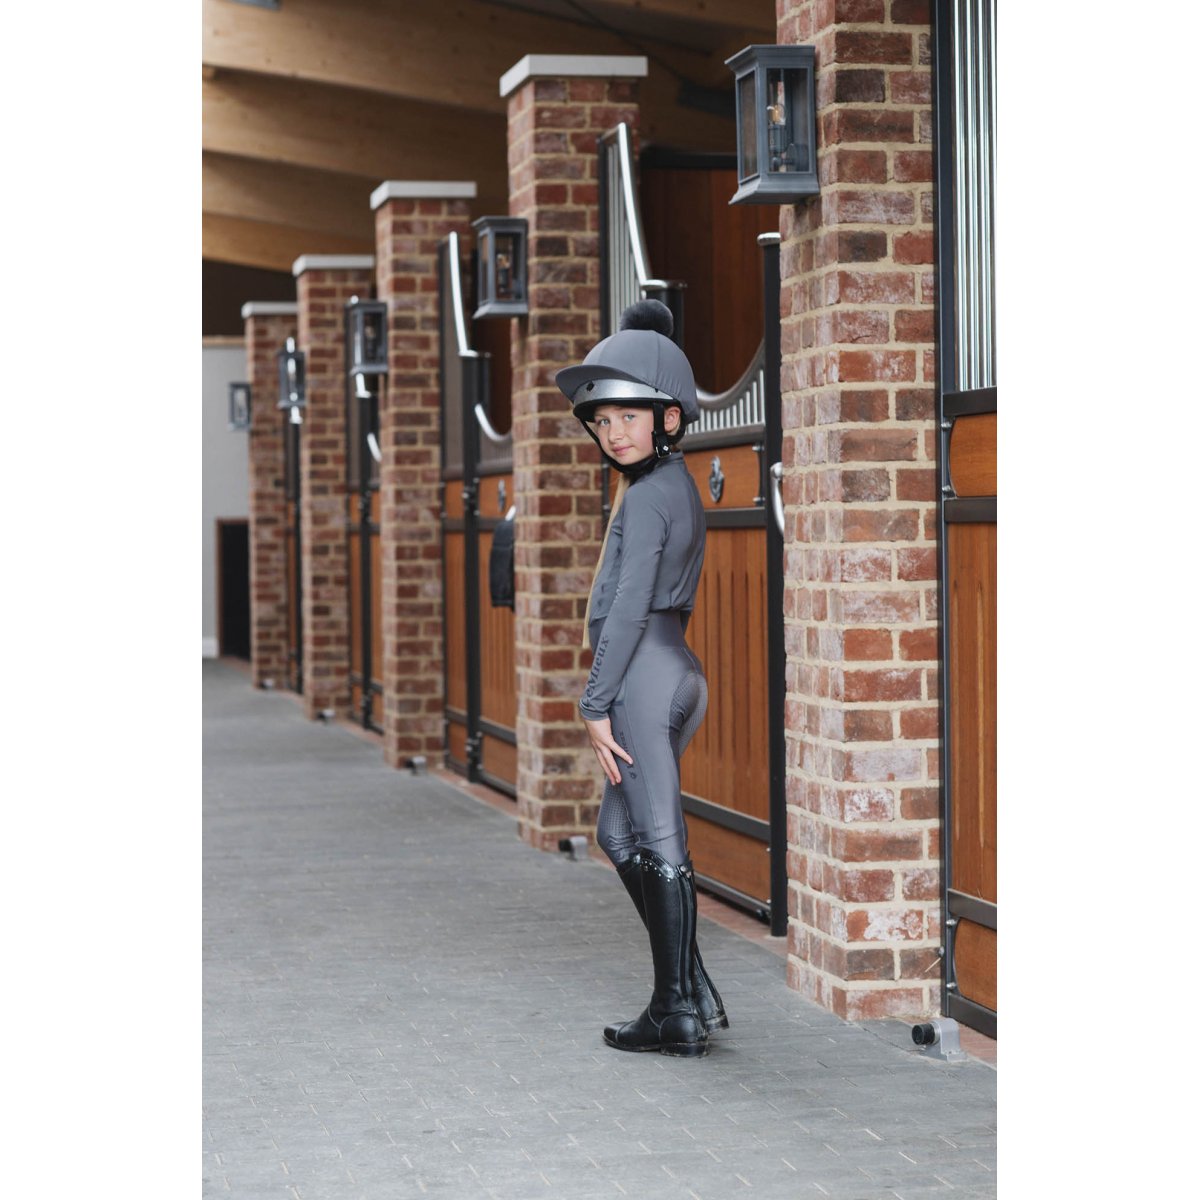 Young rider in helmet and horse riding tights by stable doors.